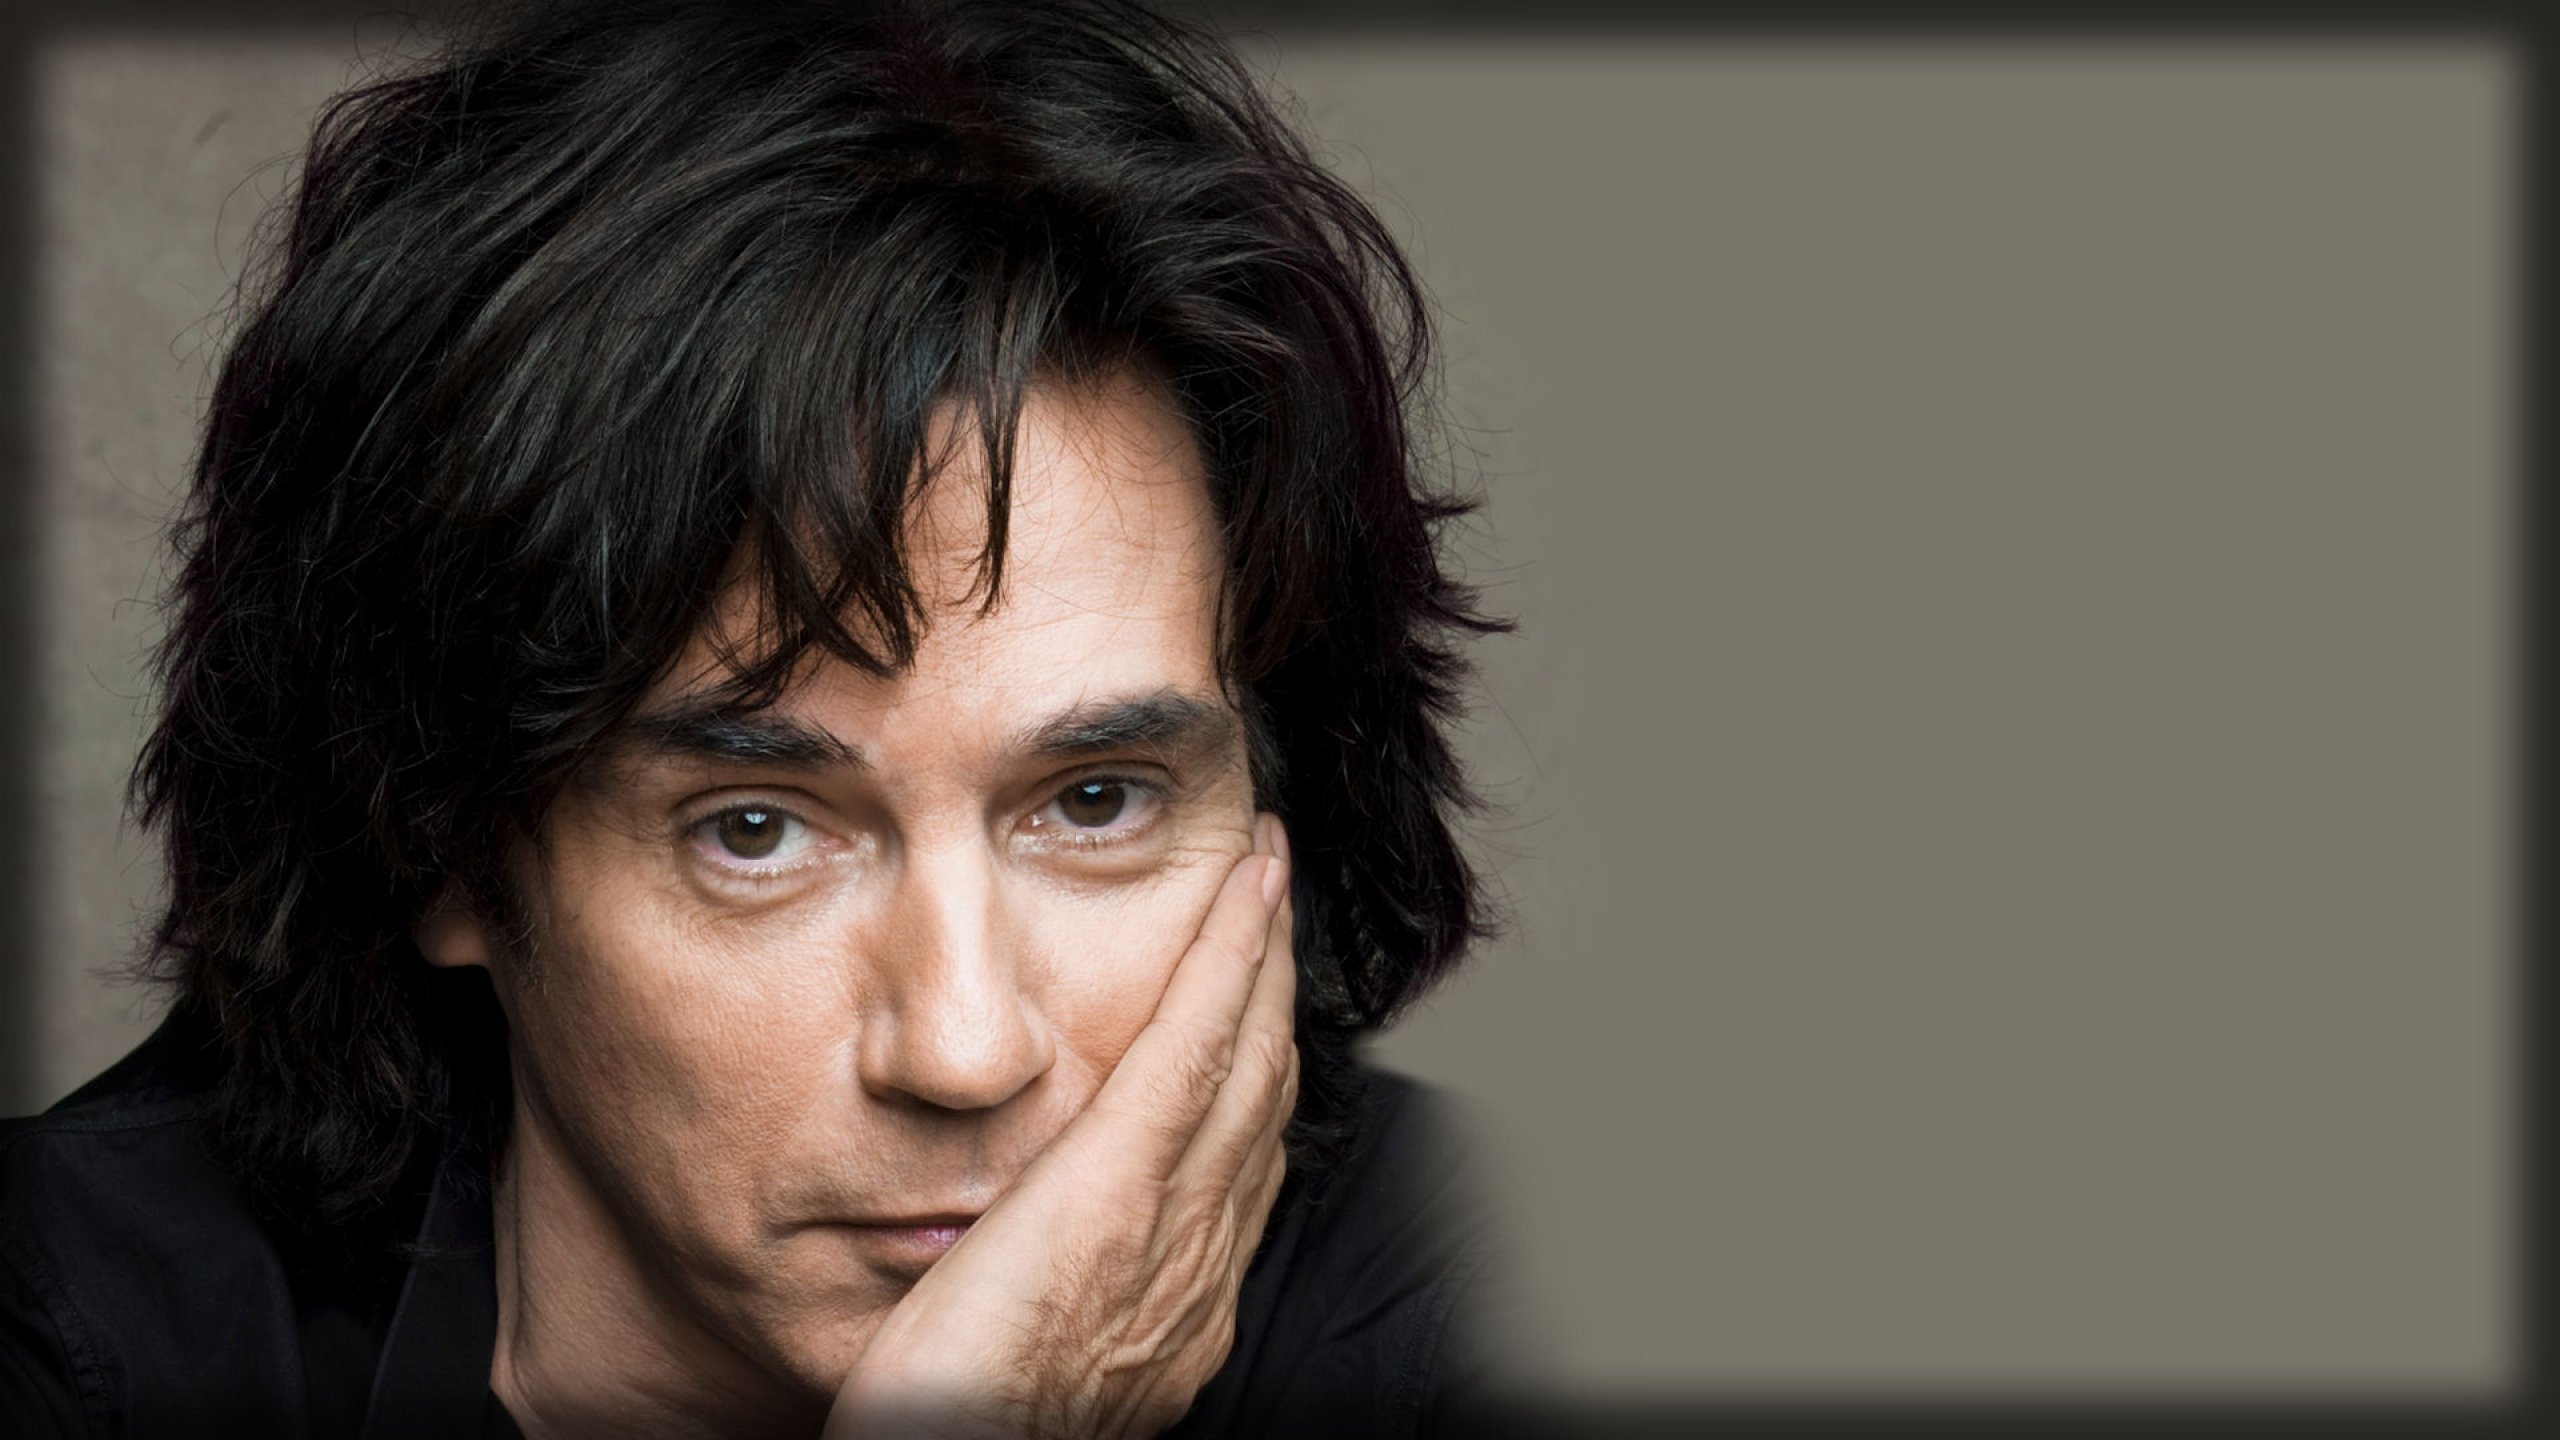 The great Jean-Michel Jarre will perform in Cluj-Napoca, fall - The Romania Journal